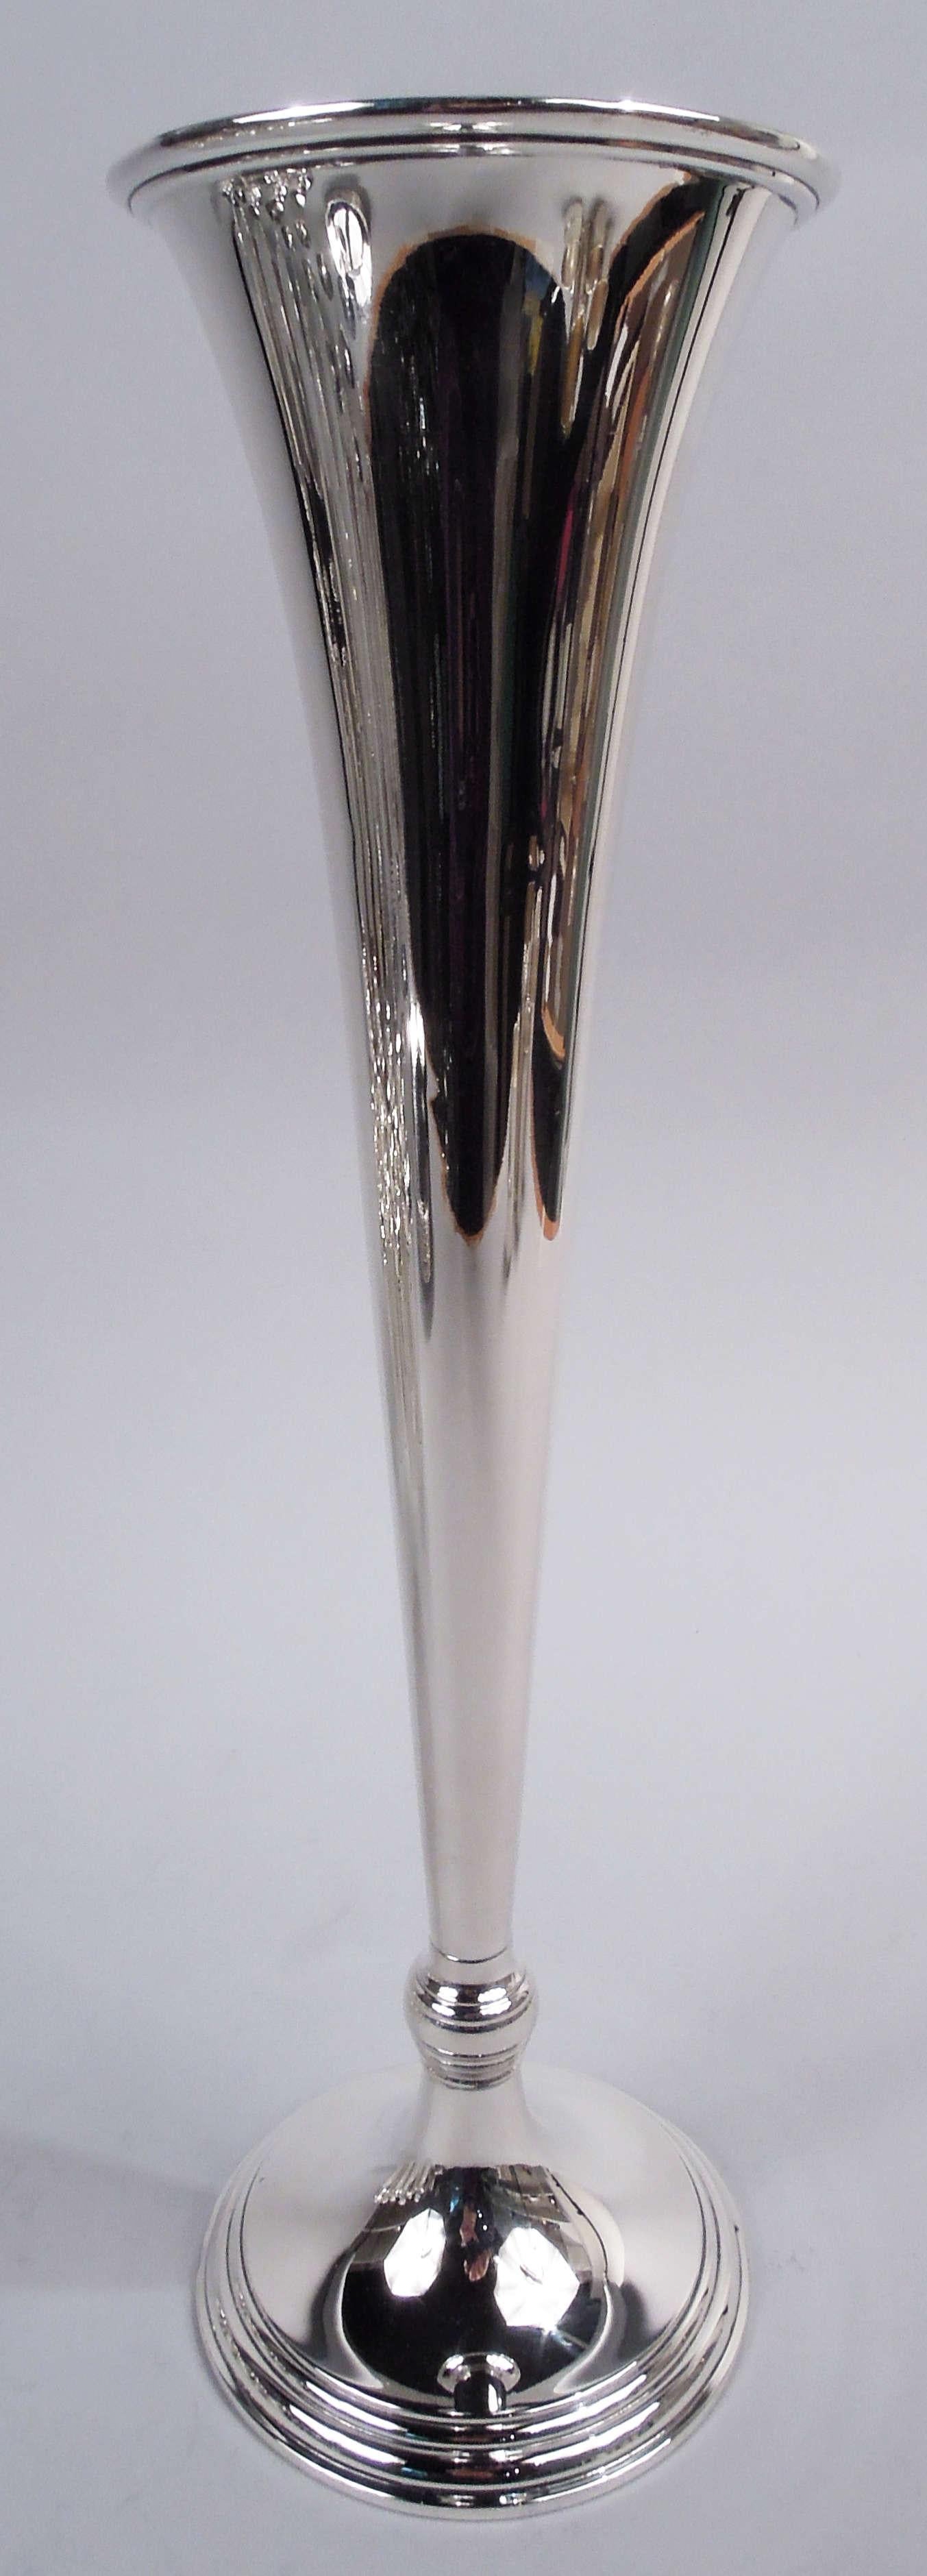 Art Deco sterling silver trumpet vase. Made by Tiffany & Co. in New York, ca 1915. Tall and narrow cone with flared rim and ribbed base knop on round and stepped foot. Fully marked including maker’s stamp, pattern no. 18870 (first produced in 1915),